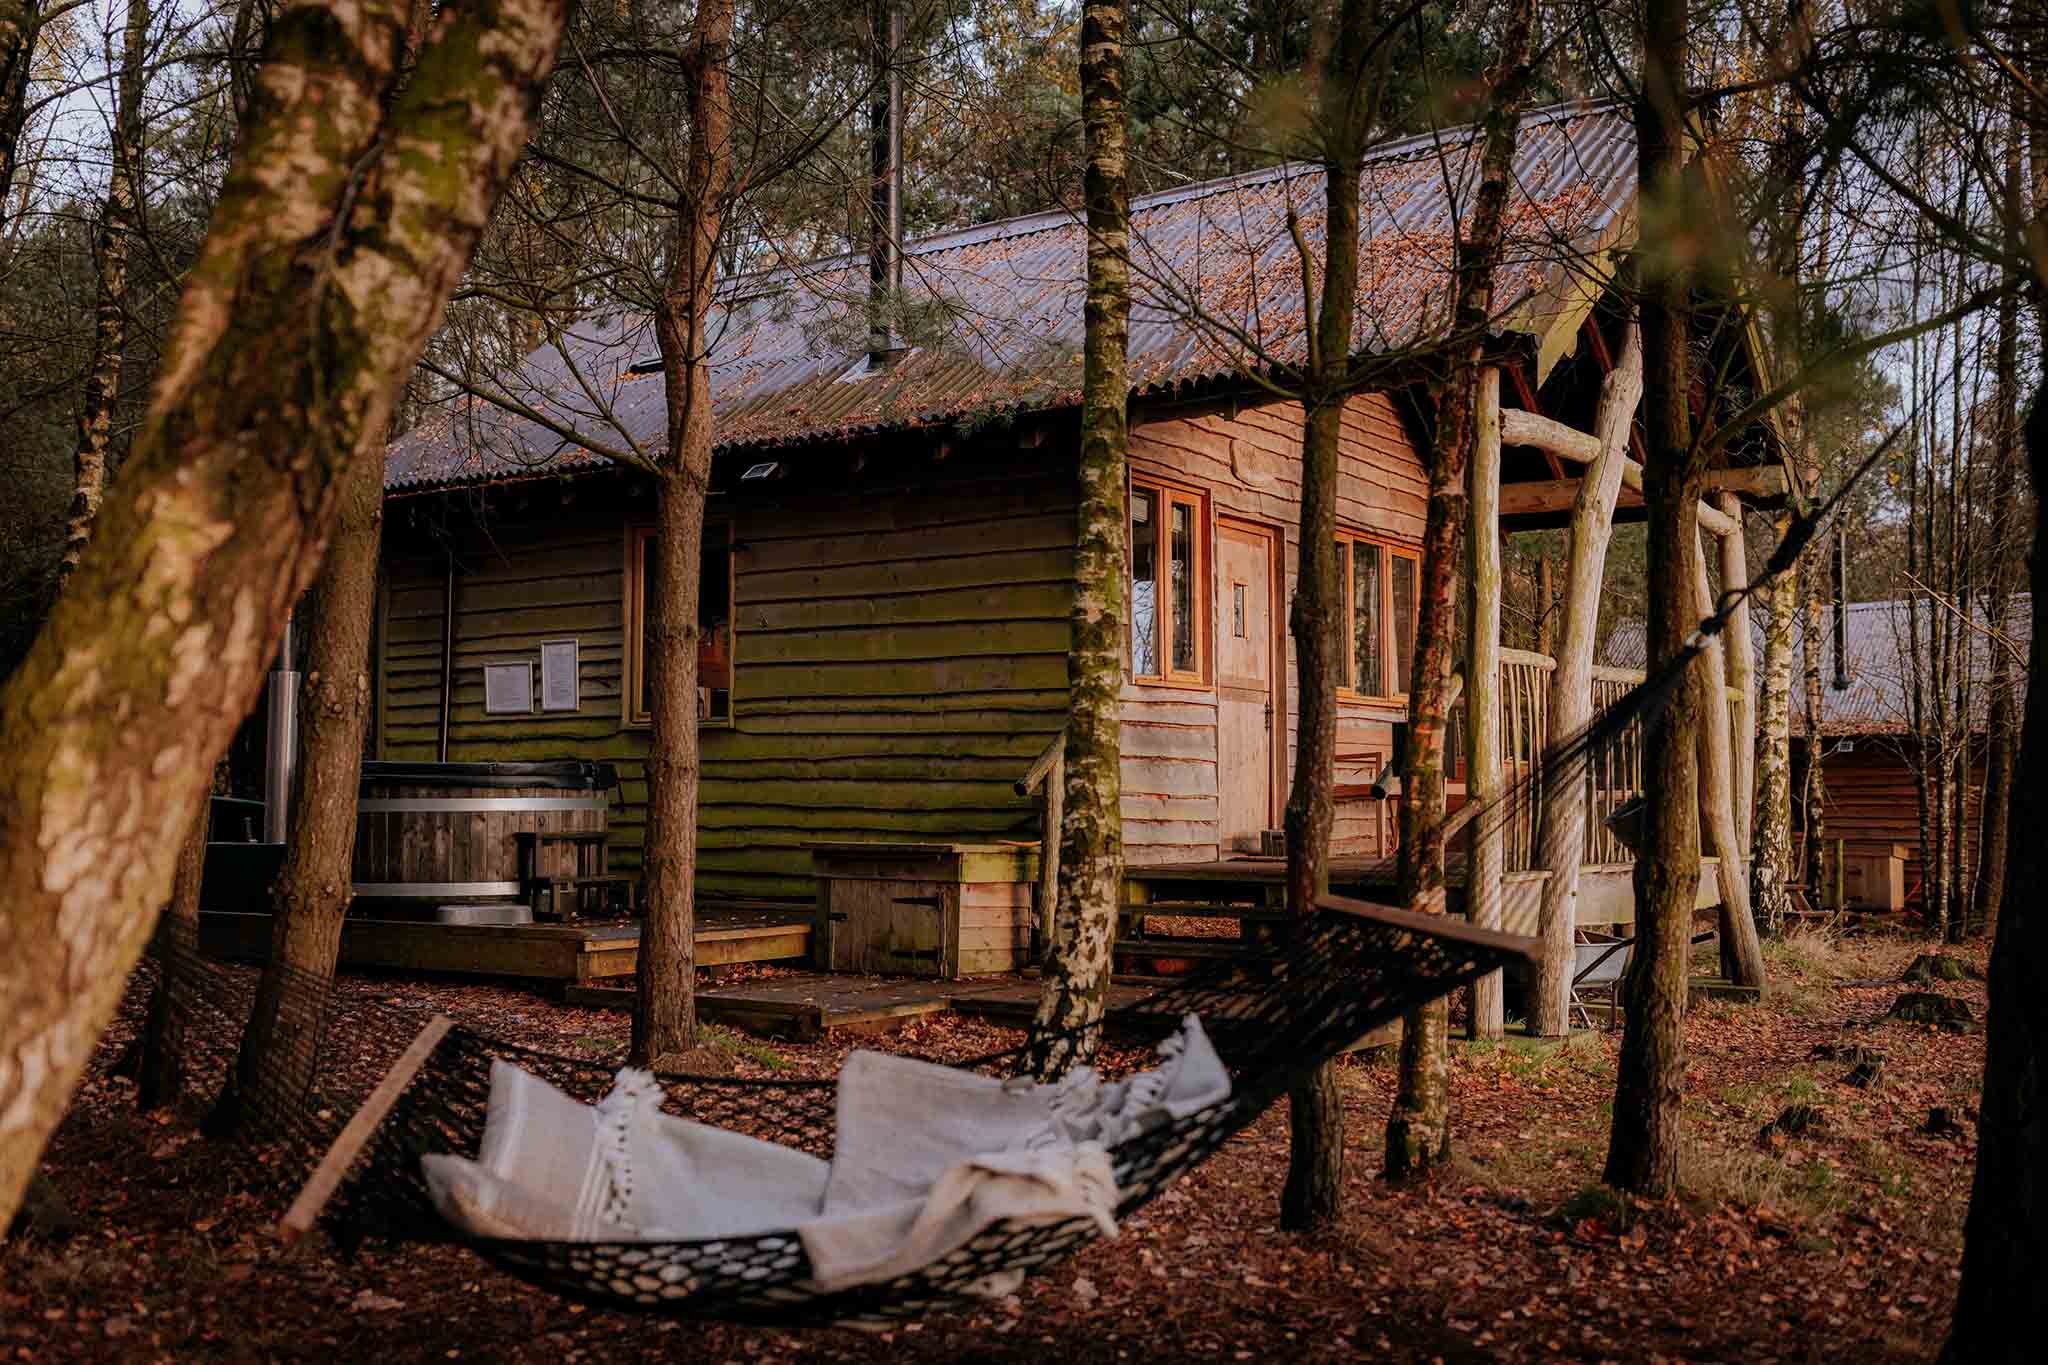 Tree lodge in the woods with swing outside